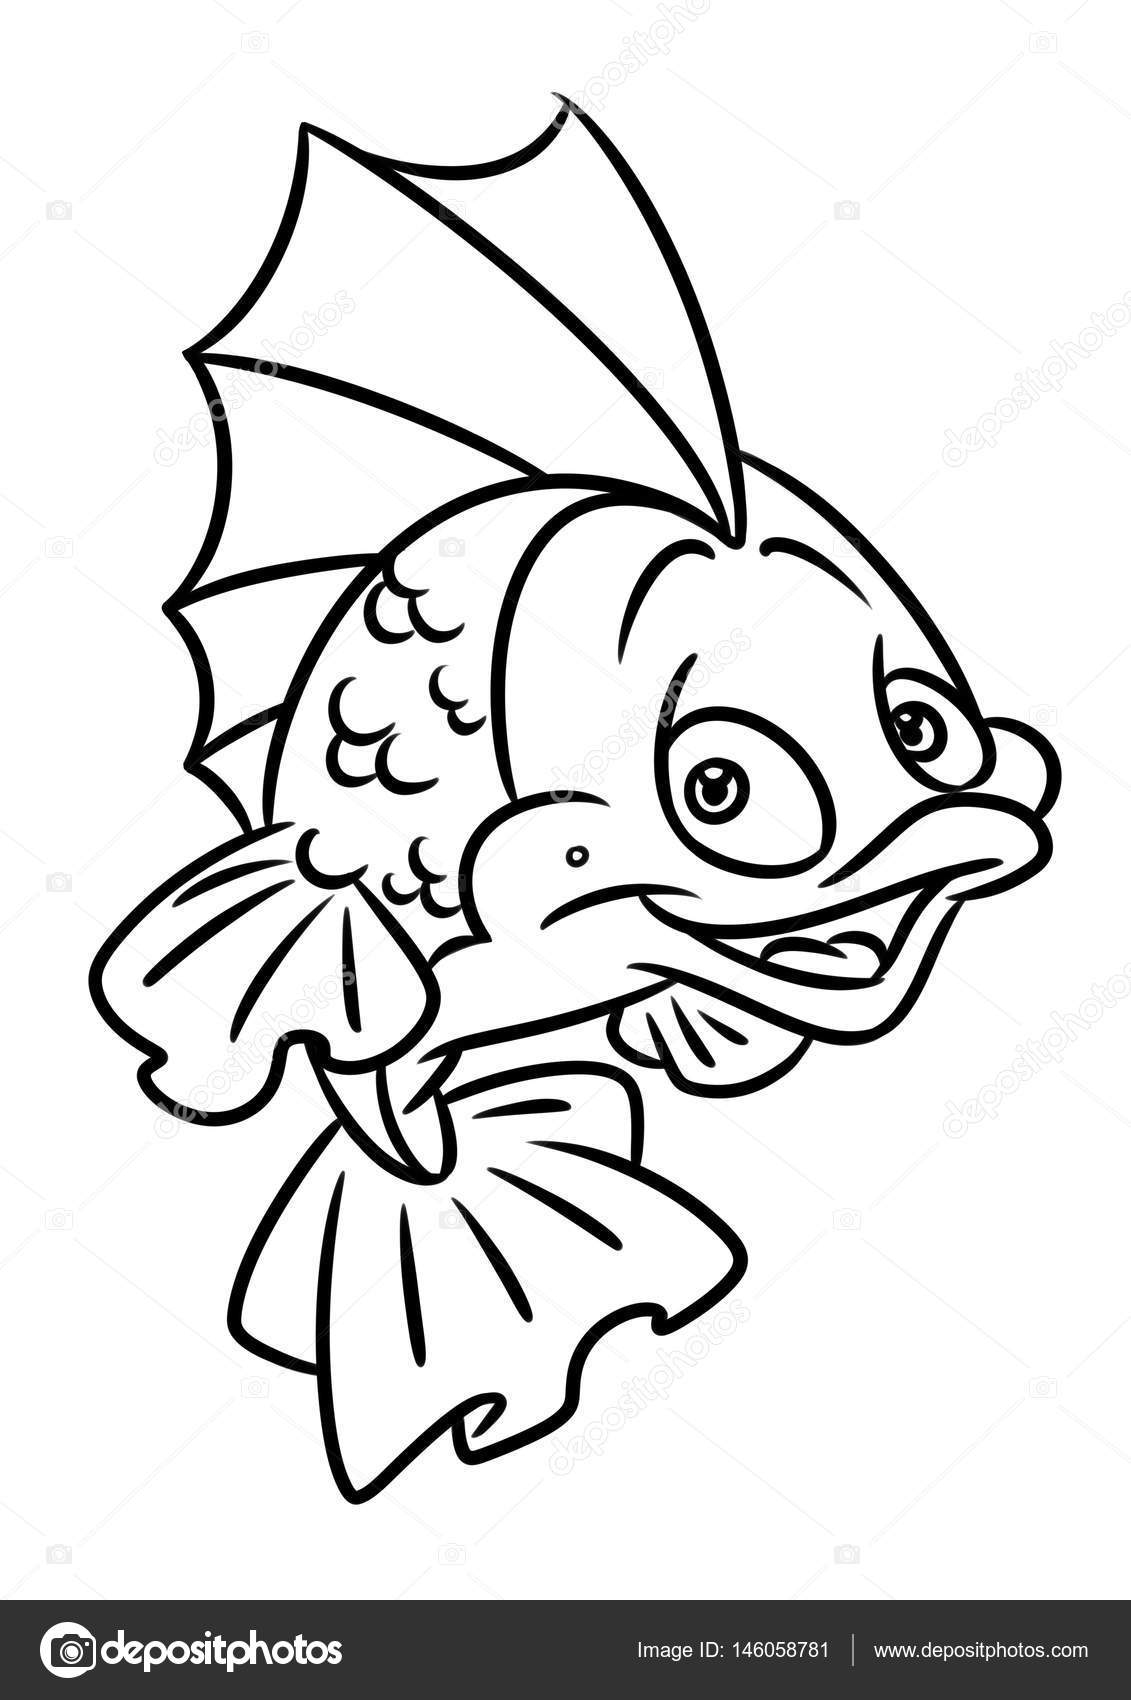 Fish coloring page cartoon Illustrations Stock Photo by ©Efengai 146058781